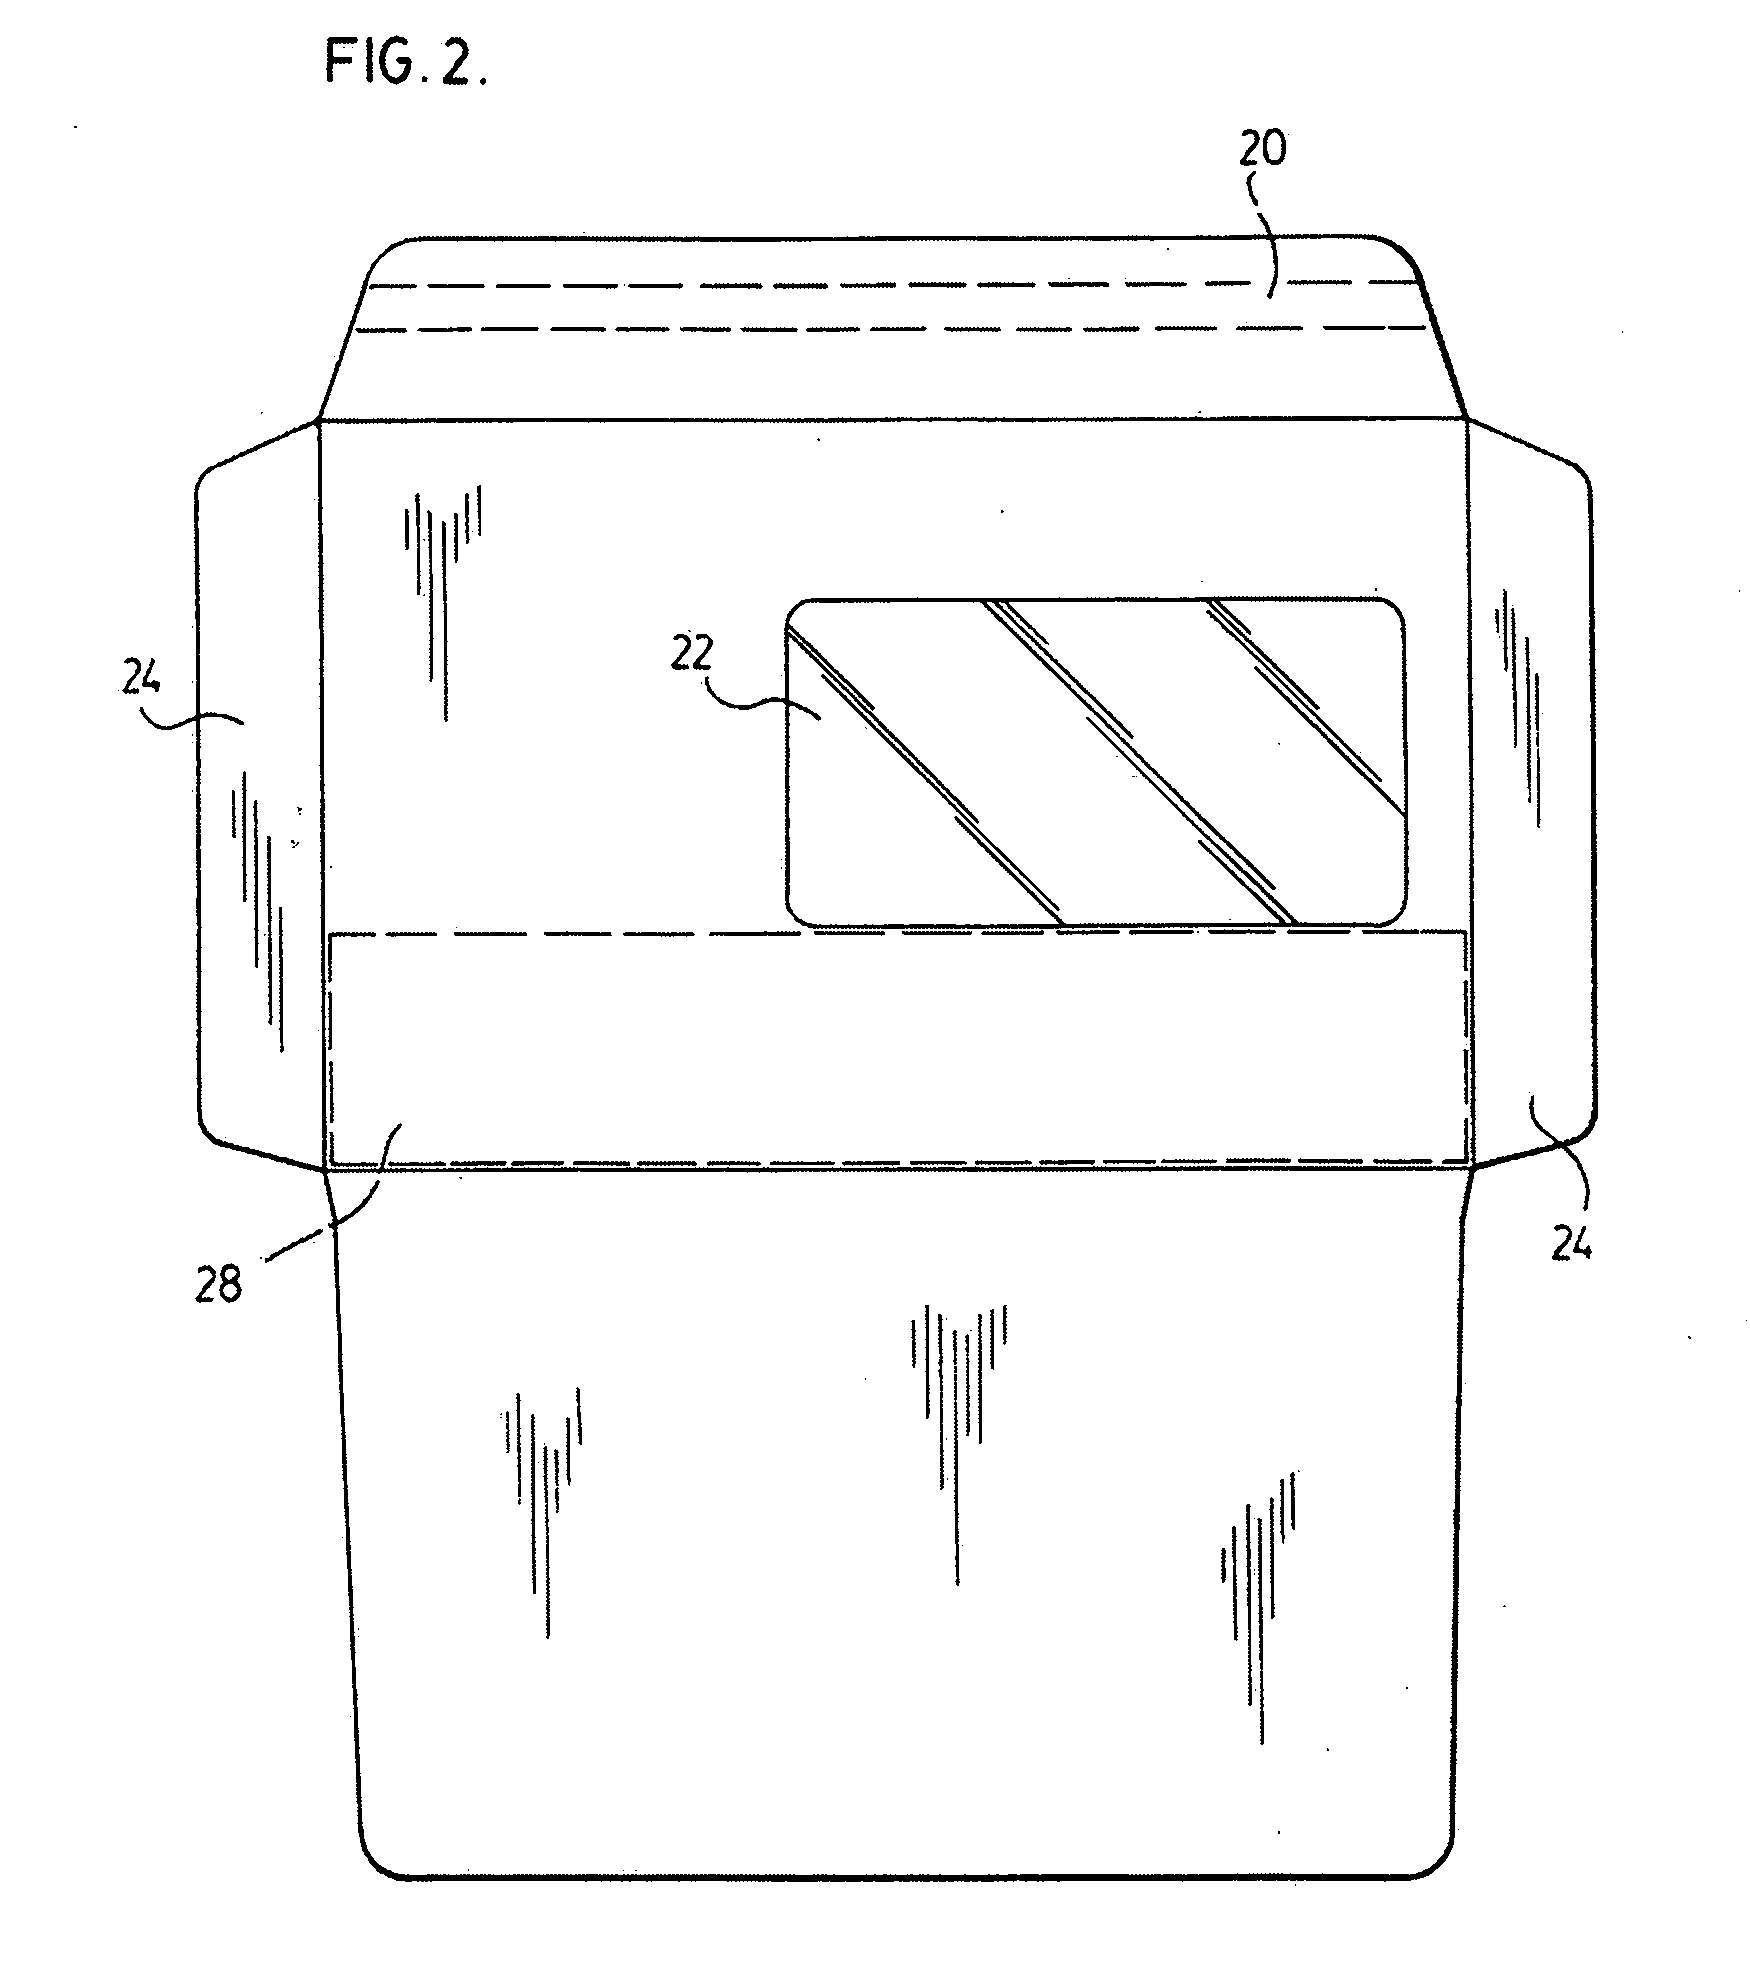 Envelope for mailing of cards containing an embedded chip